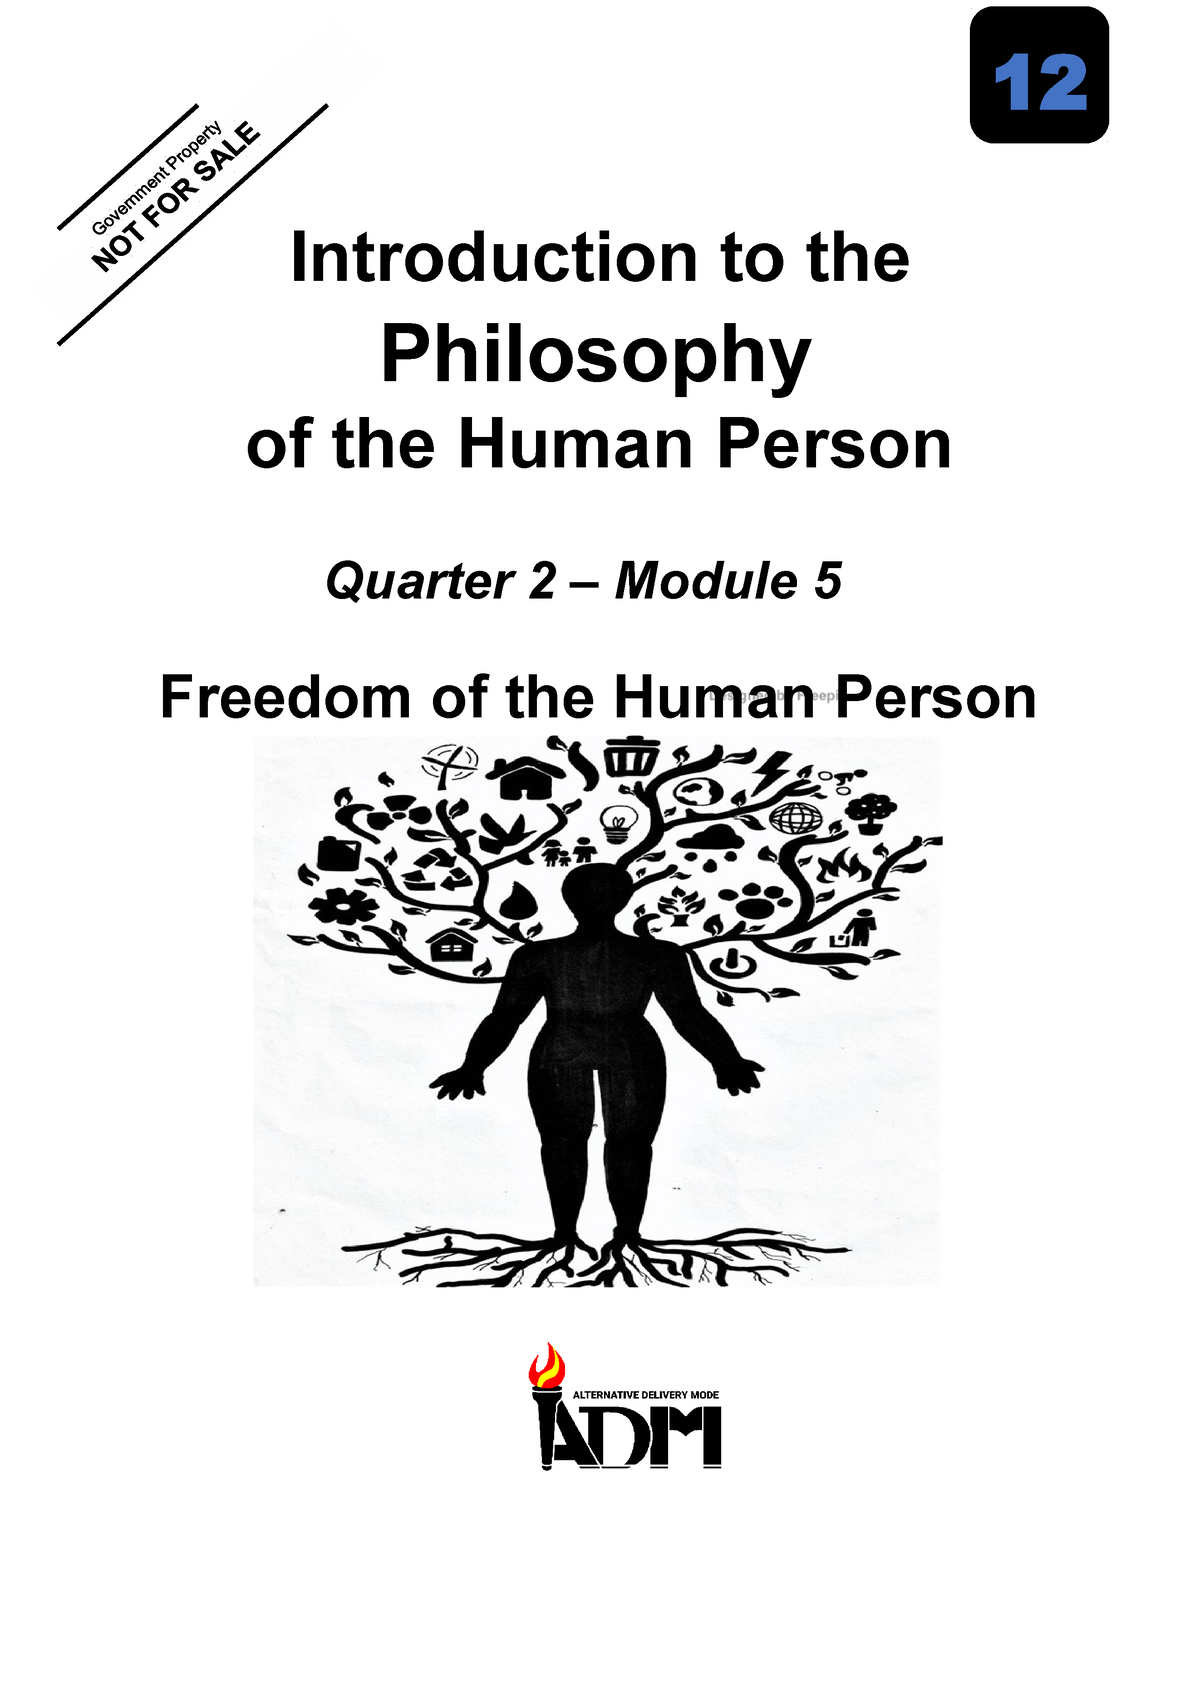 Philo Q2 Module 5 Introduction To The Philosophy Of The Human Person Quarter 2 Module 5 3398